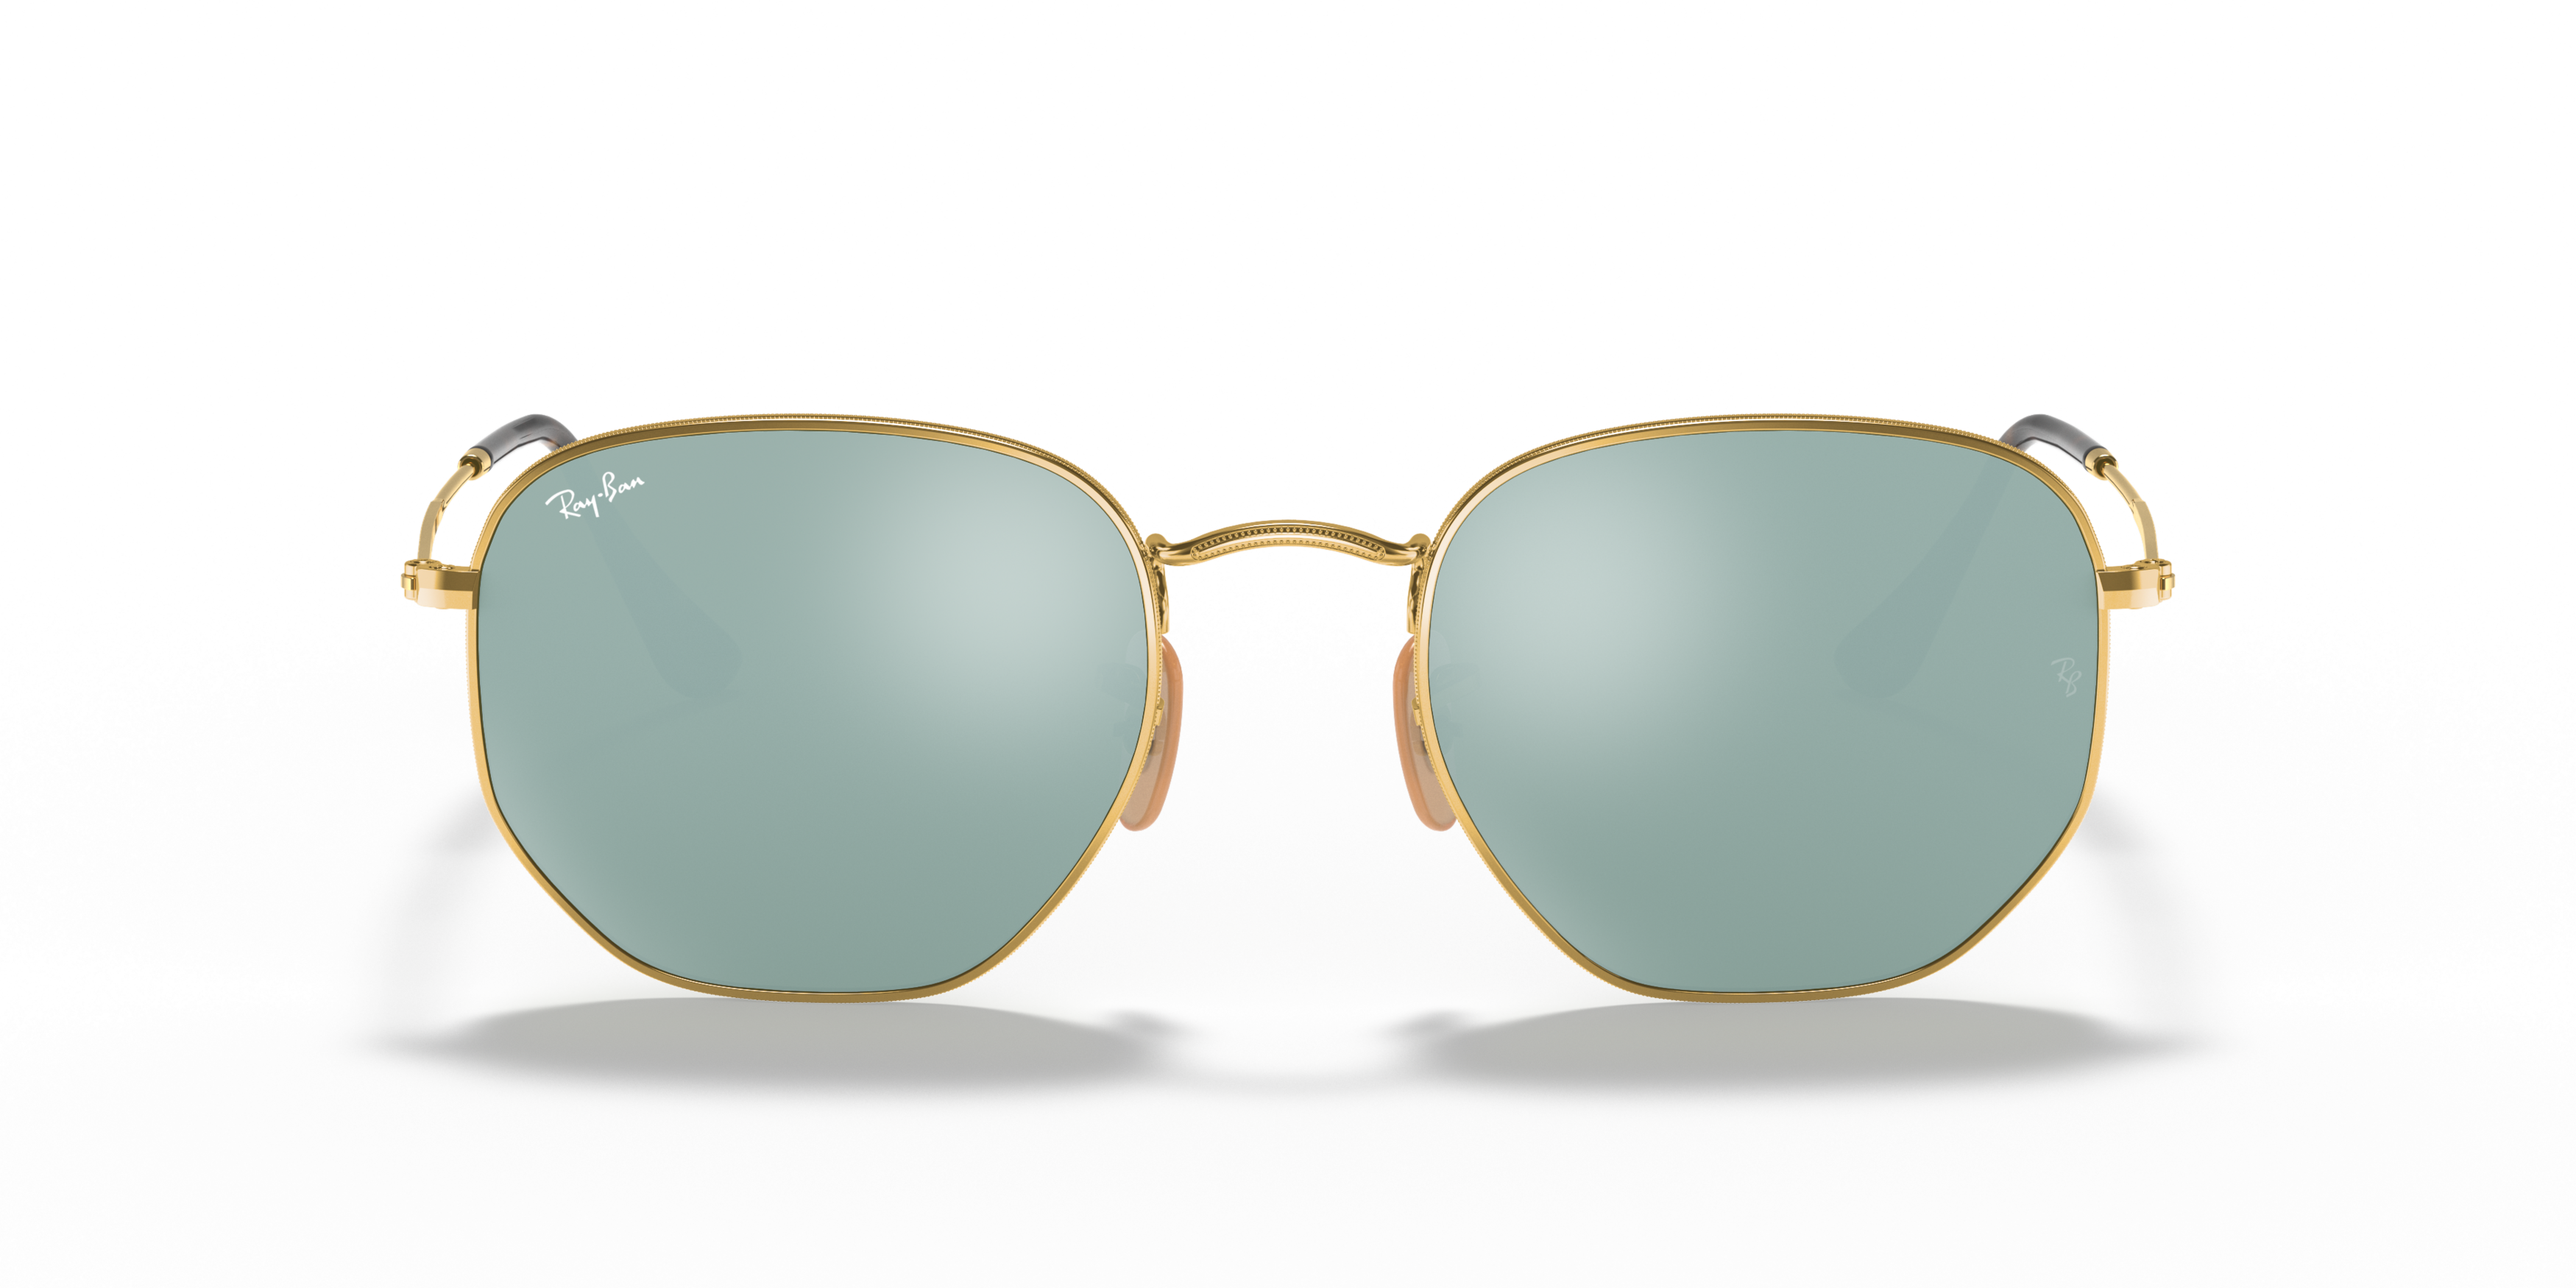 [products.image.front] RAY-BAN RB3548N 001/30